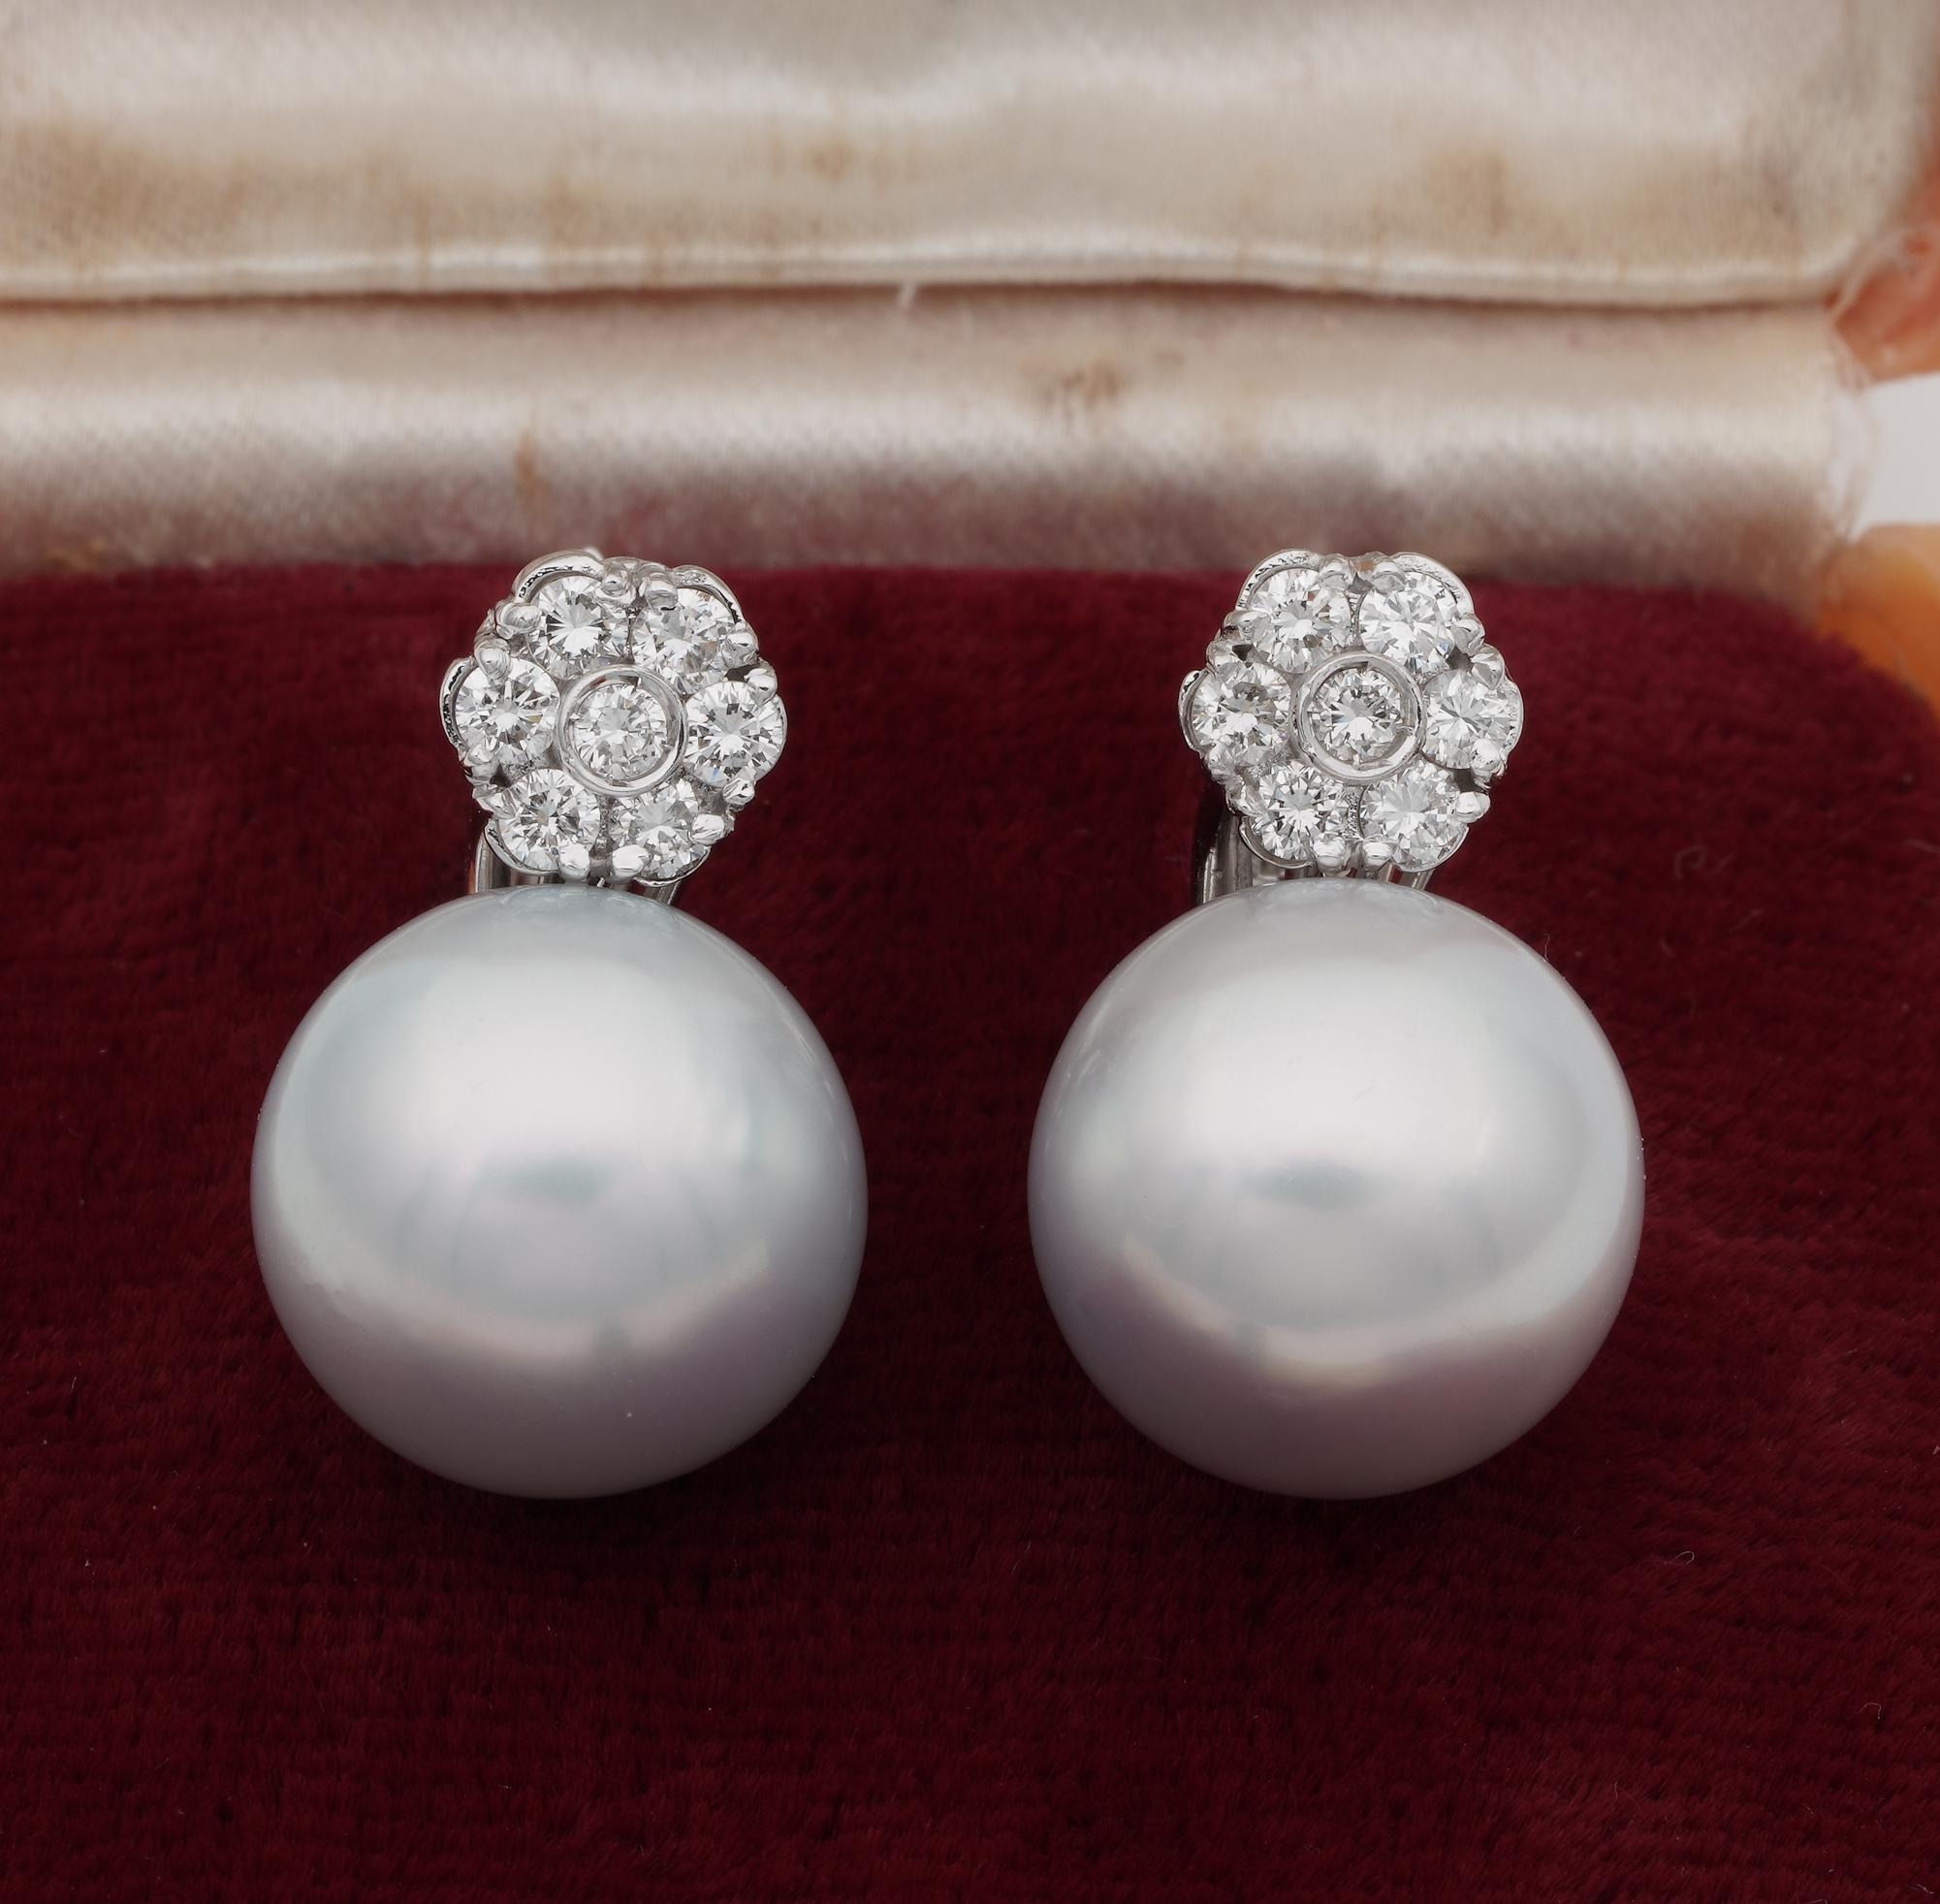 Superb!

Essential classy style for formal or informal look, beautifully designed vintage earrings, 1980 ca
Solidly constructed of solid 18 KT white gold to stand on as statement earrings for you as show off at any occasion
Large jumbo size South